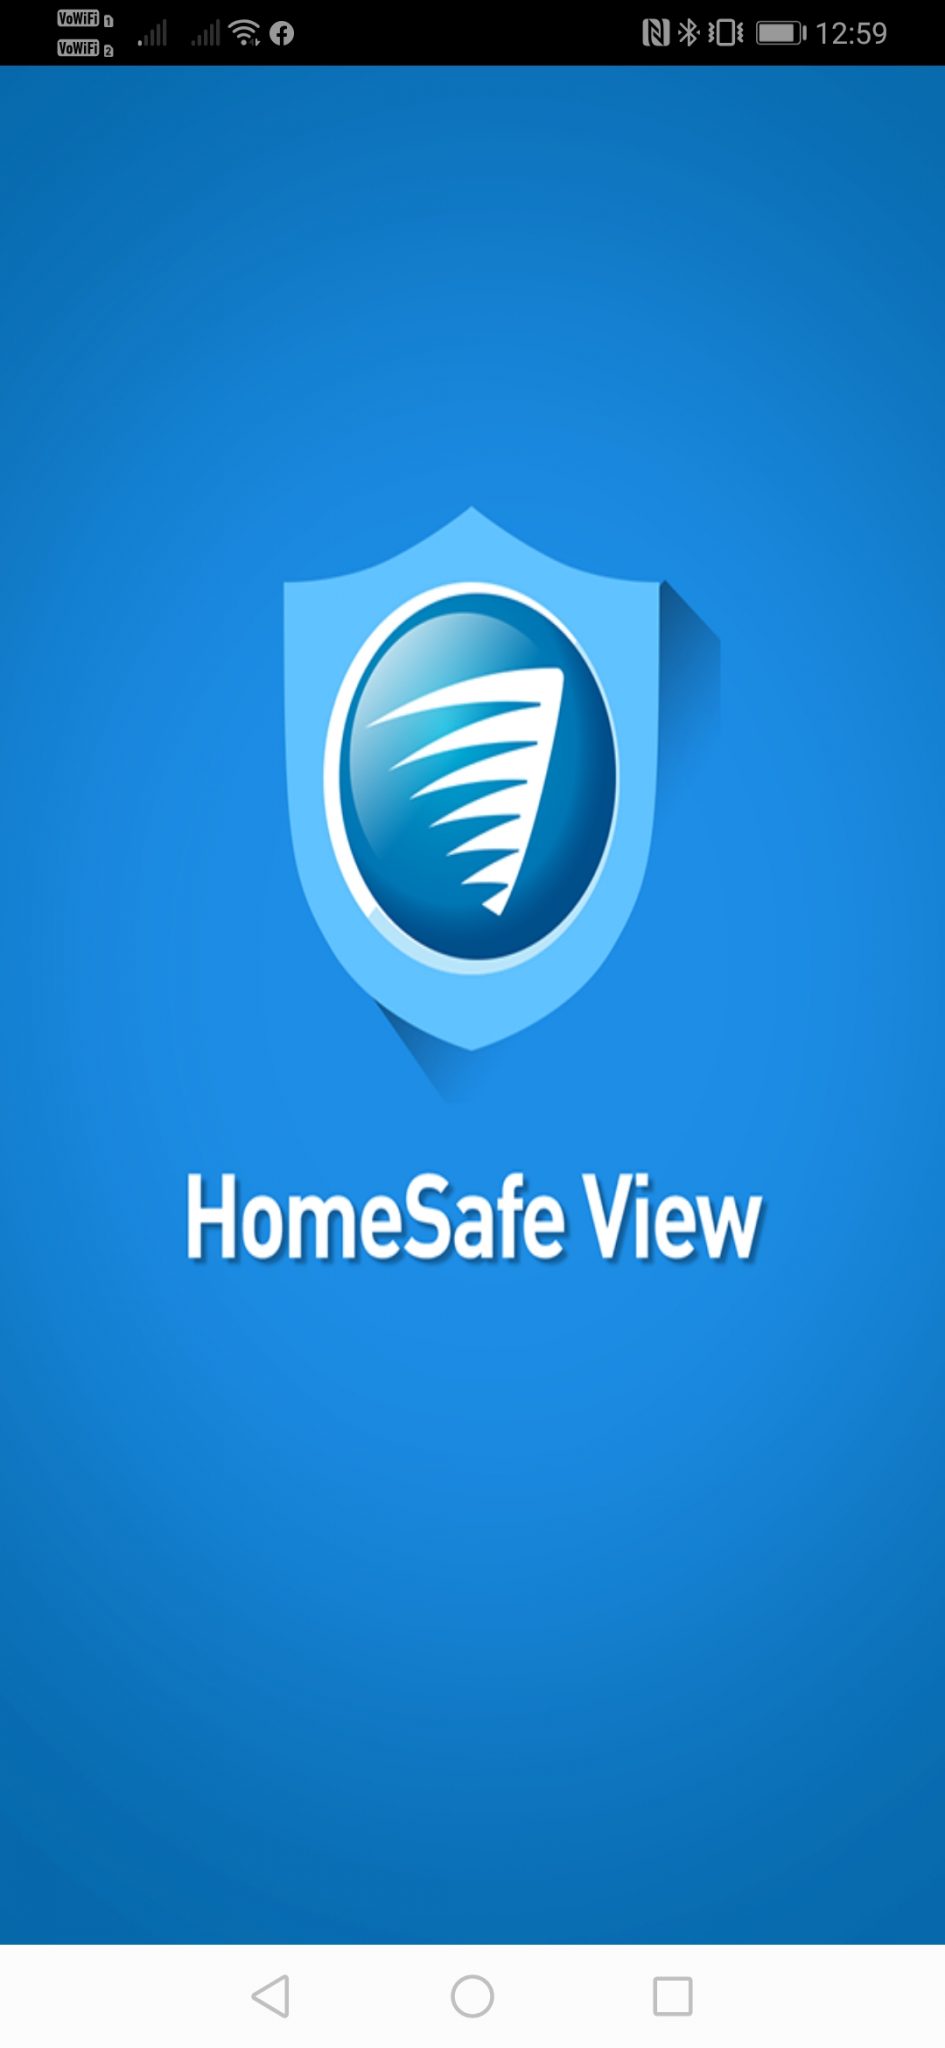 swann homesafe view for windows